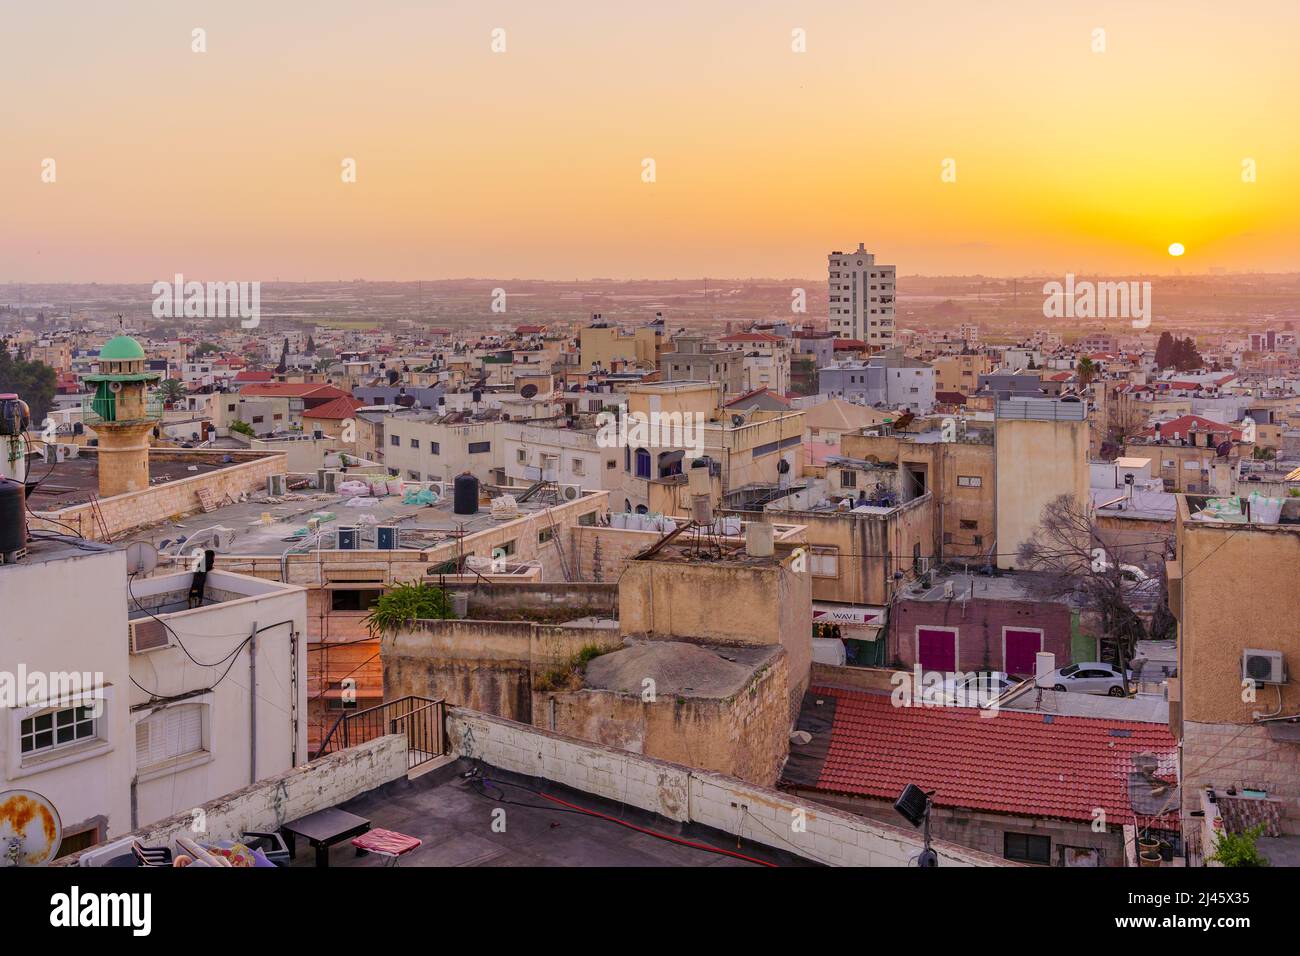 Tayibe, Israel - April 09, 2022: Sunset rooftop view of the ancient center and Omar ibn al-Khattab Mosque, in Tayibe, a Muslim Arab town in central Is Stock Photo